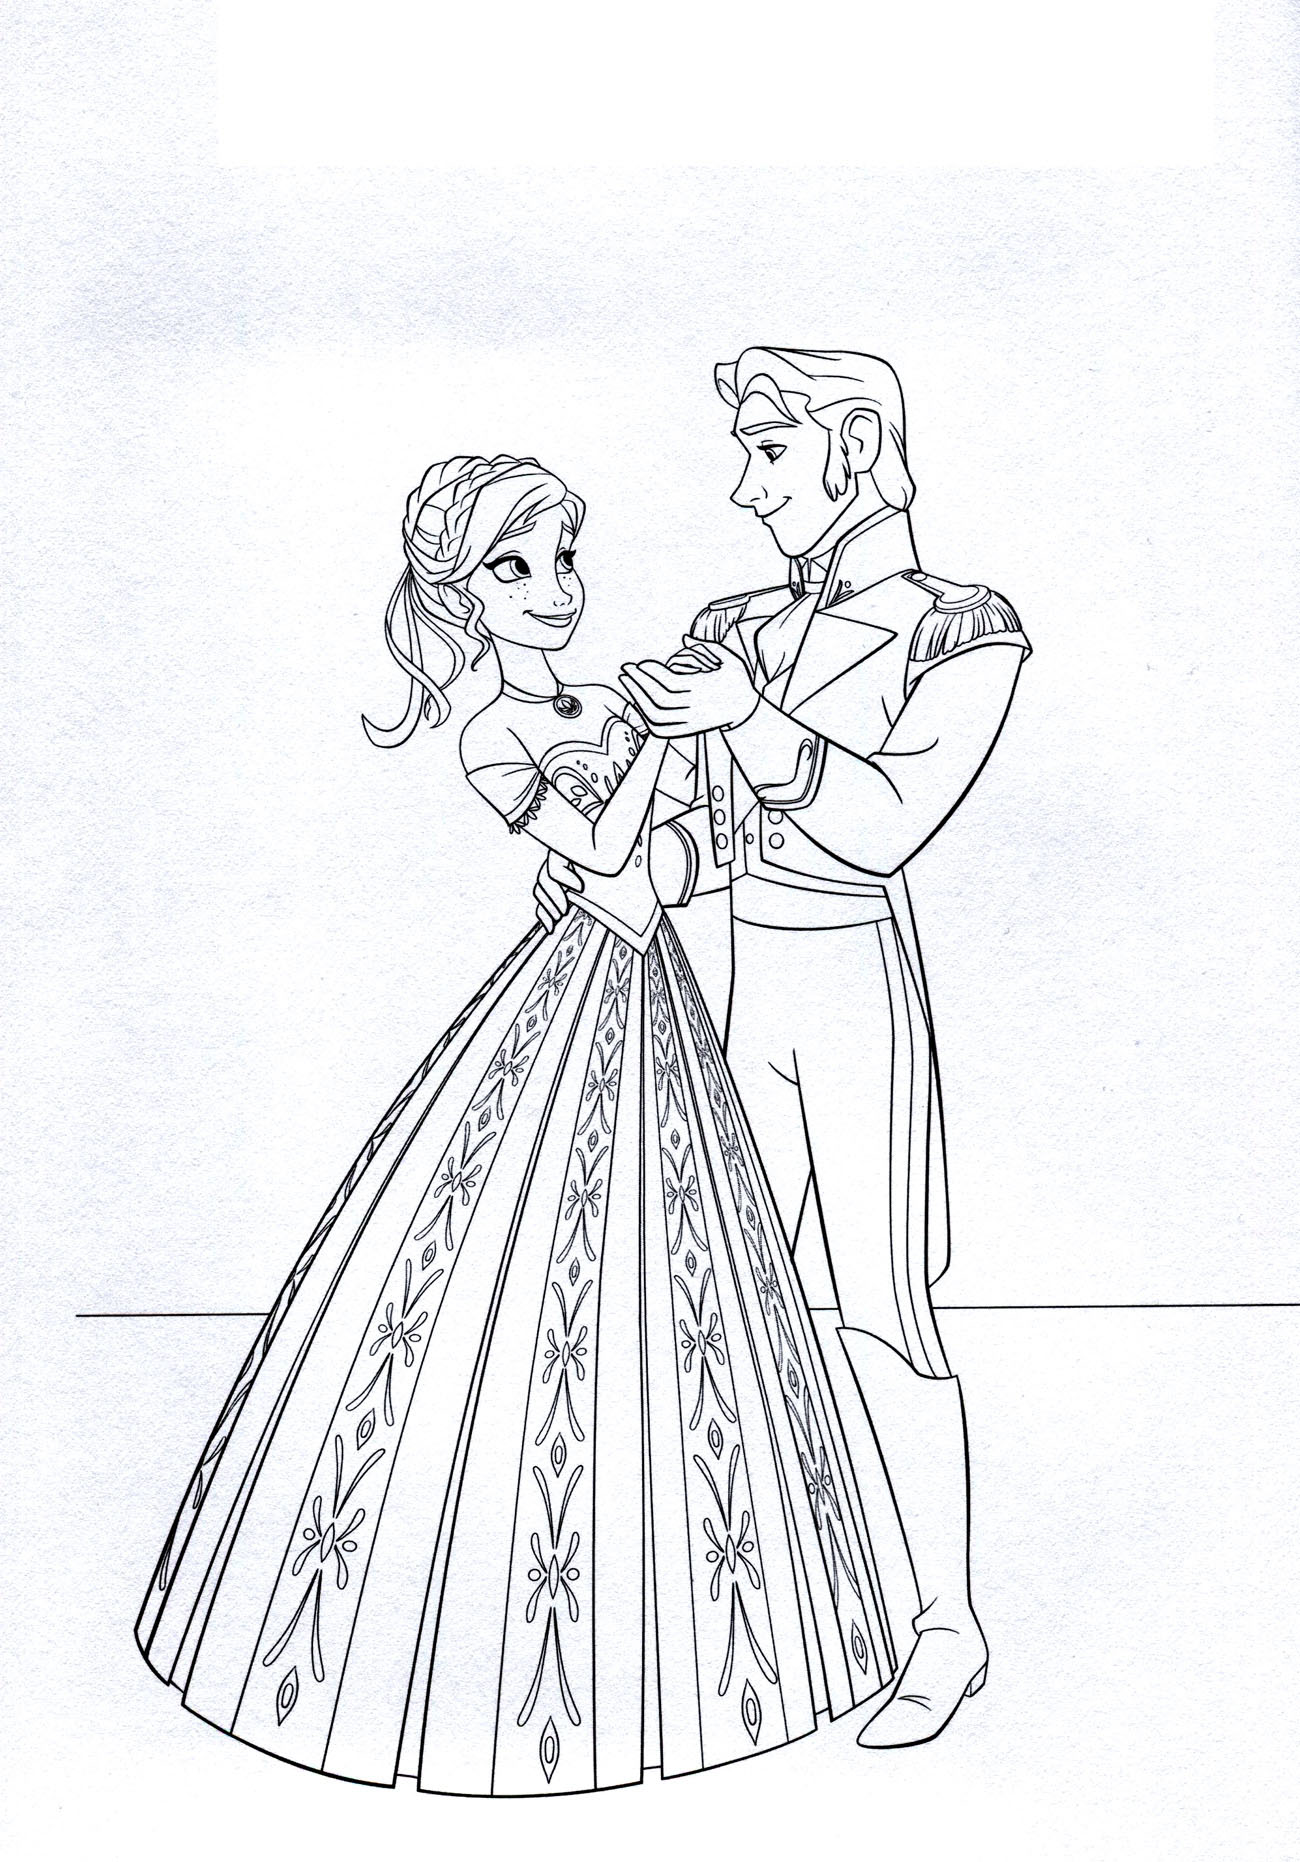 Easy free Frozen coloring page to download : Anna dancing with Hans